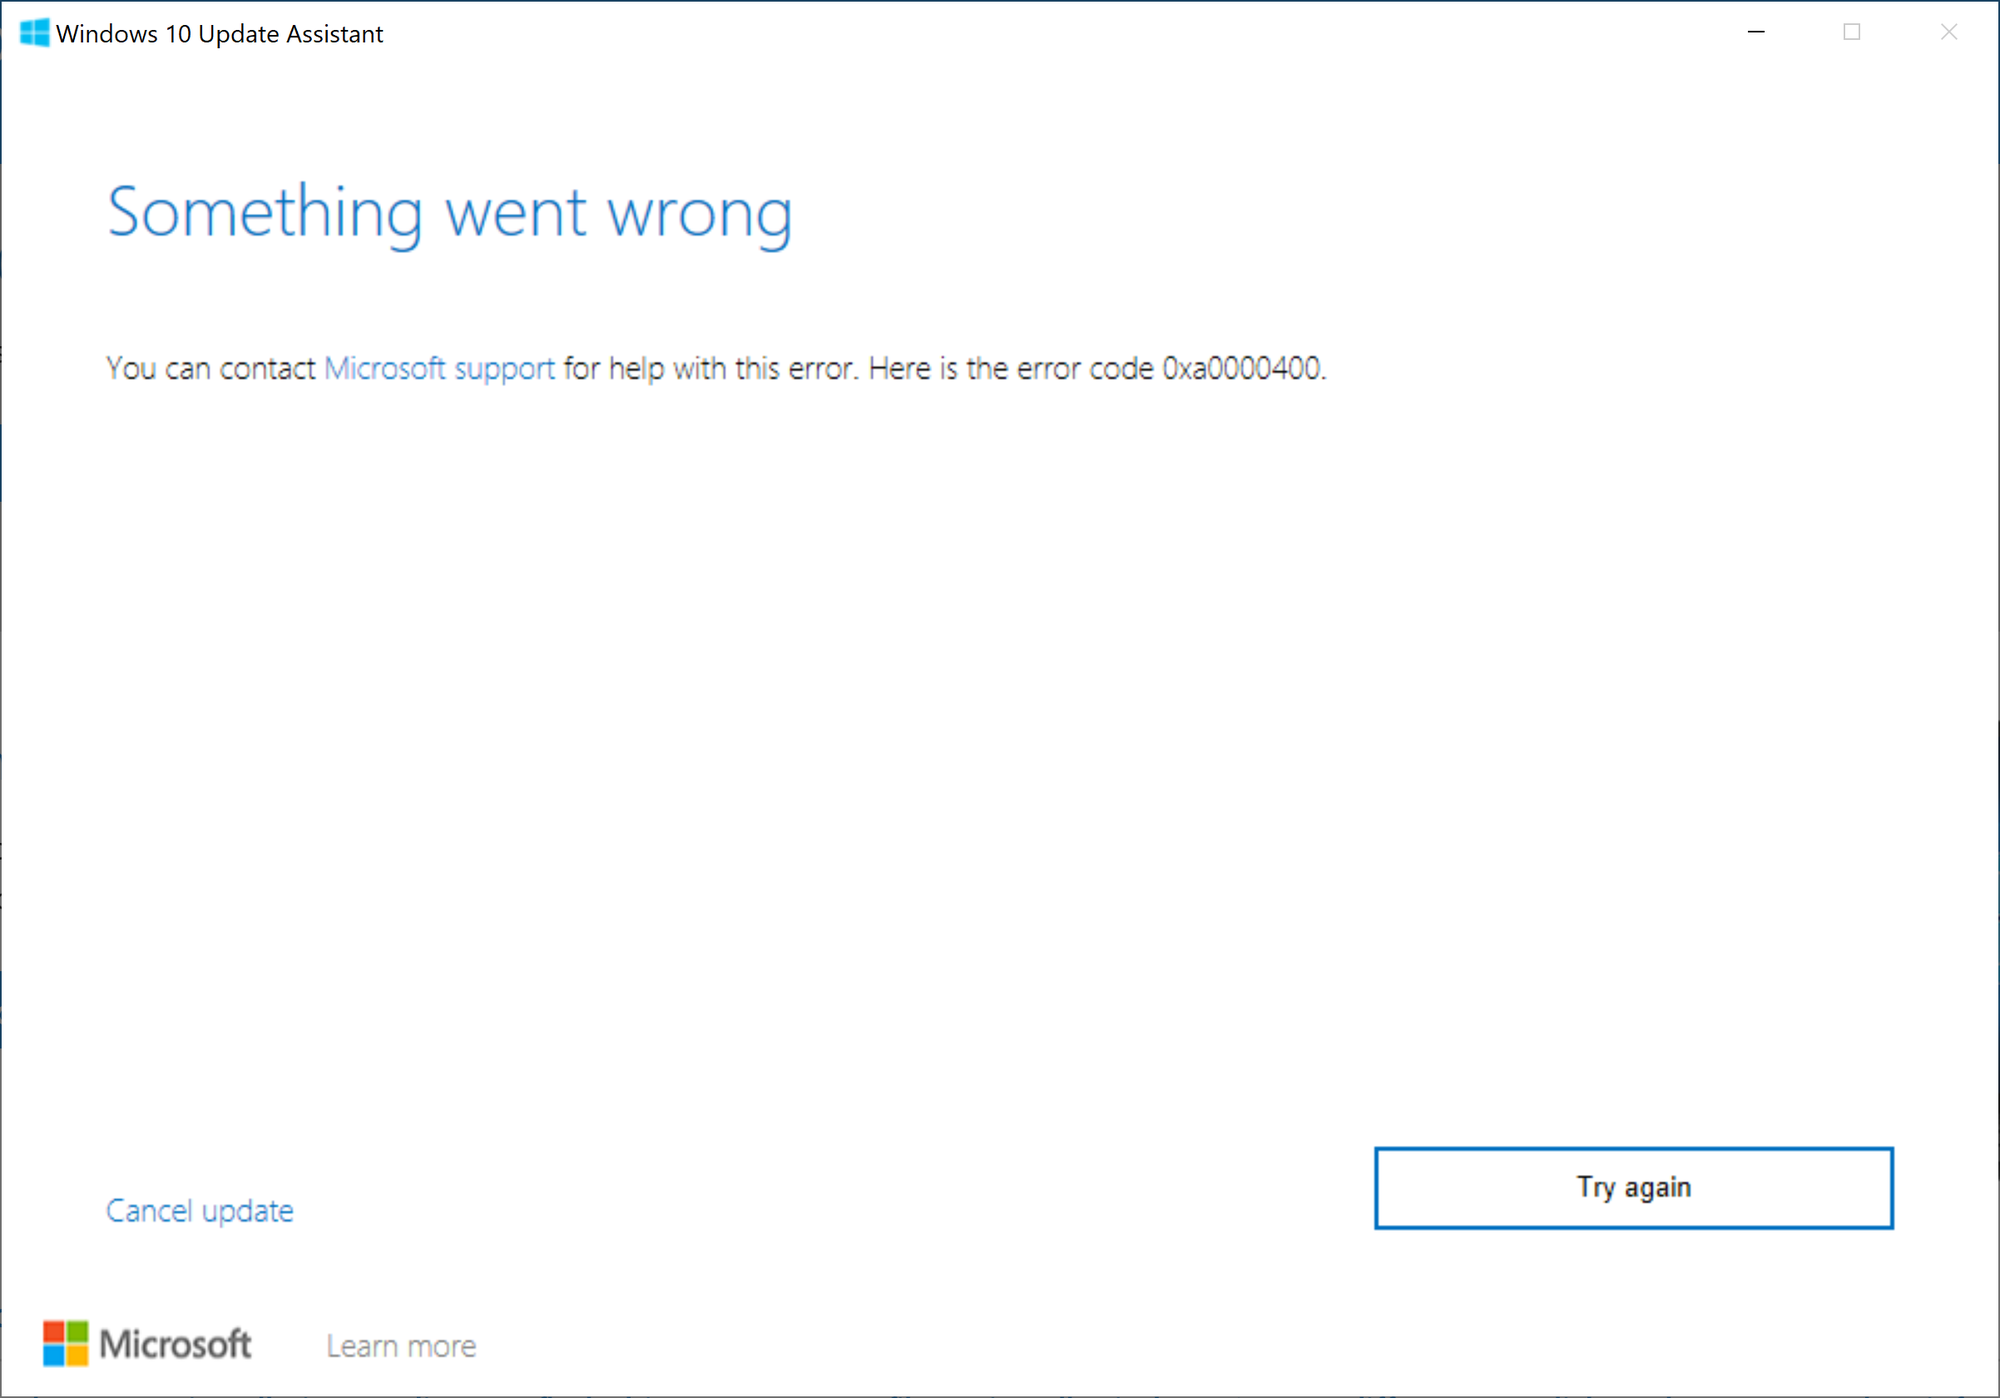 Windows 10 pro for workstation update failed with error code 0xa0000400 52d352bf-8950-45f0-a5ed-4e608af14cb1?upload=true.png